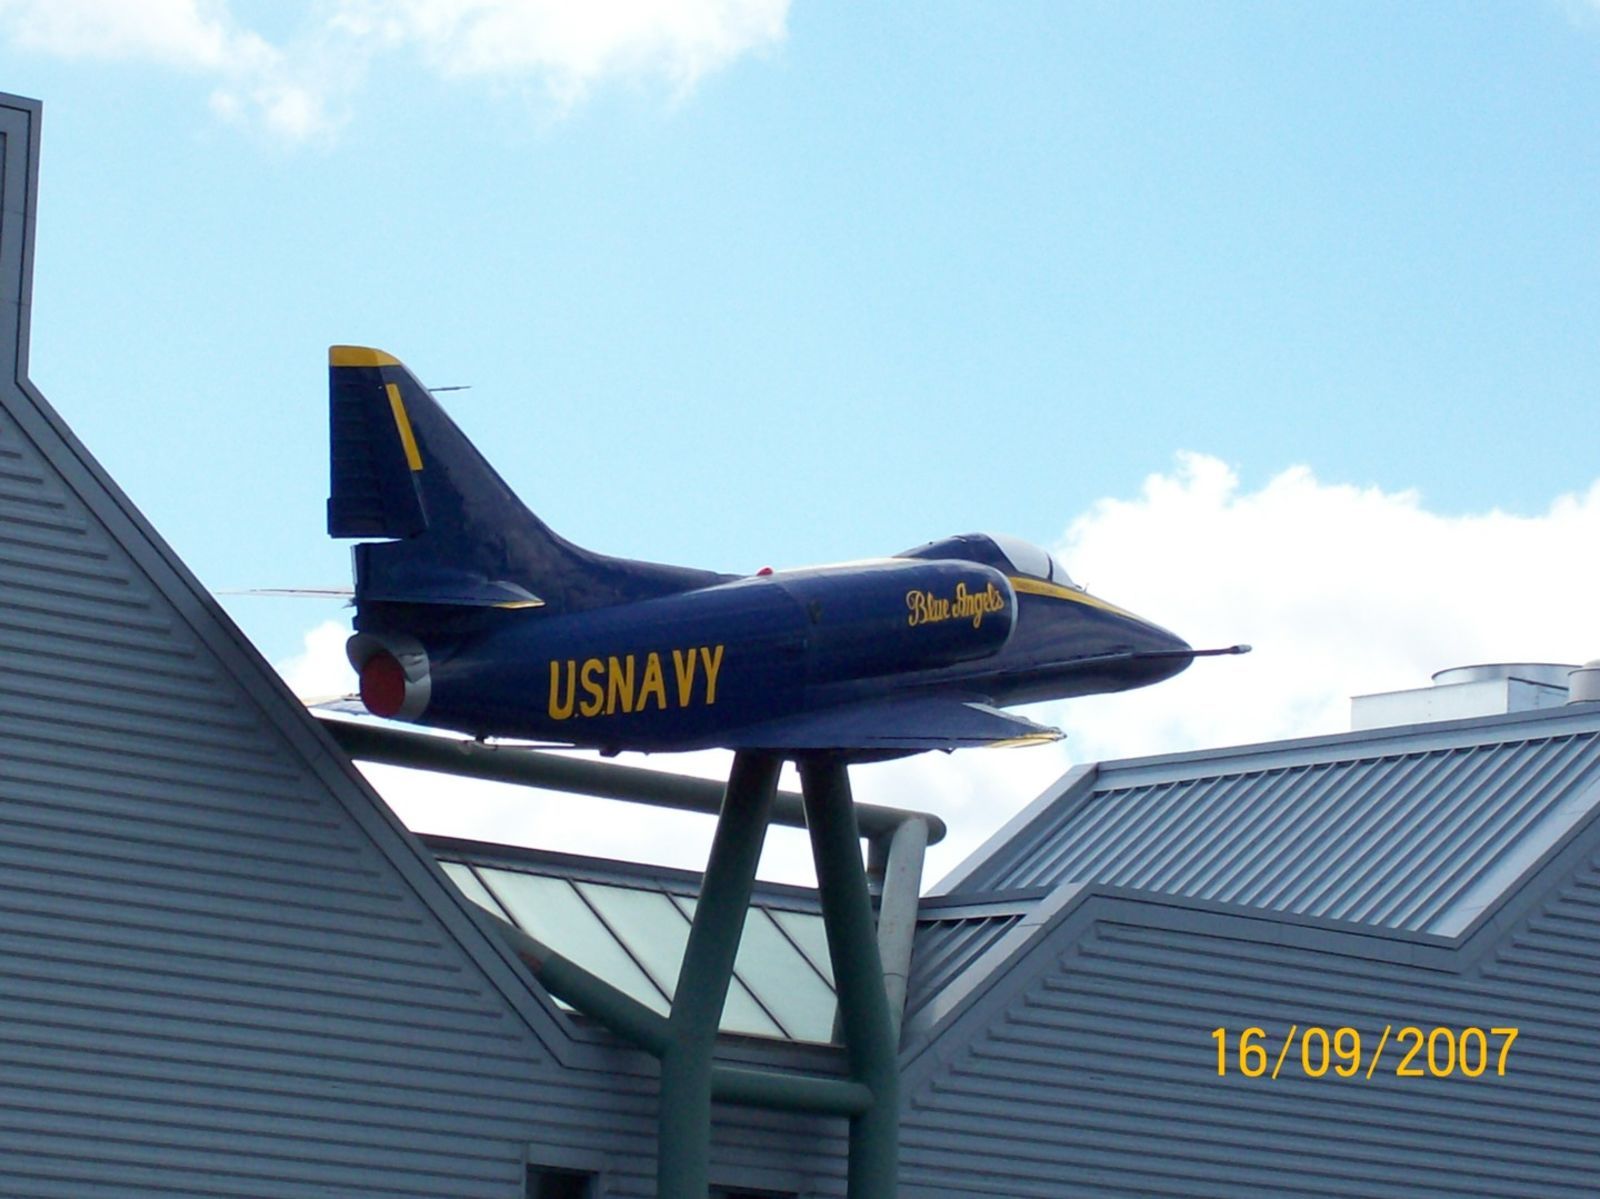 A Douglas A-4 Skyhawk, painted in Blue Angels colors.